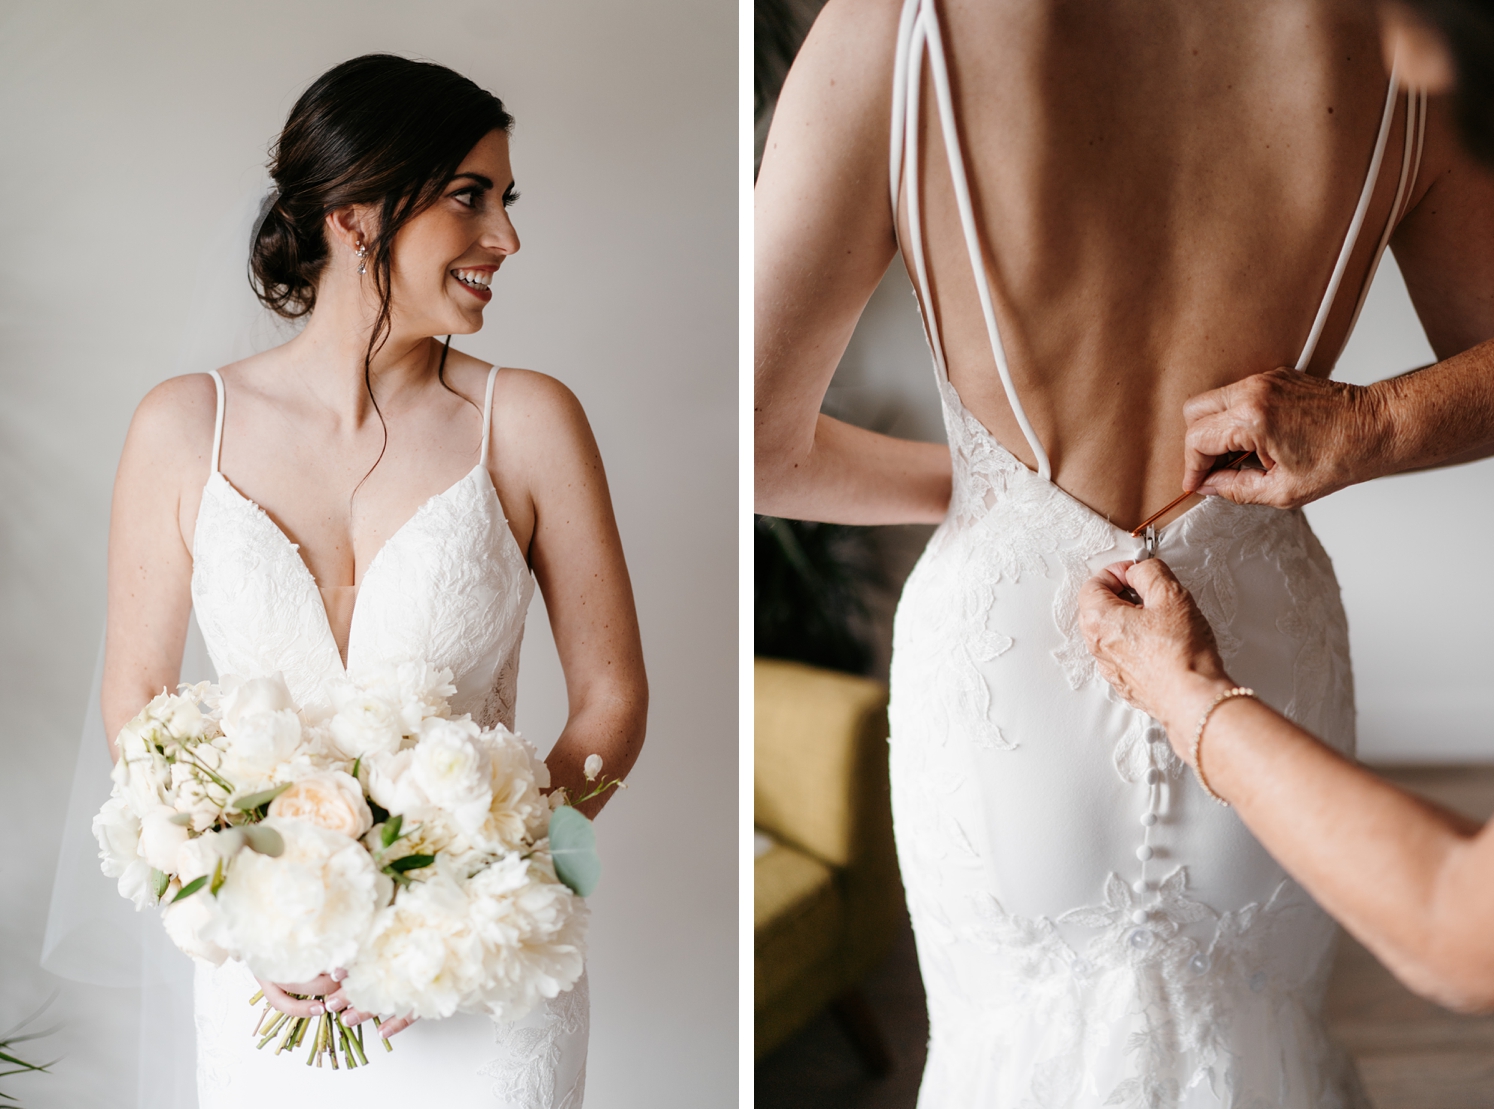 Bride holding bouquet of white peonies wearing lace fit and flare gown with a deep v-neck | White lace wedding dress with low cut back | McArthur Weddings and Events